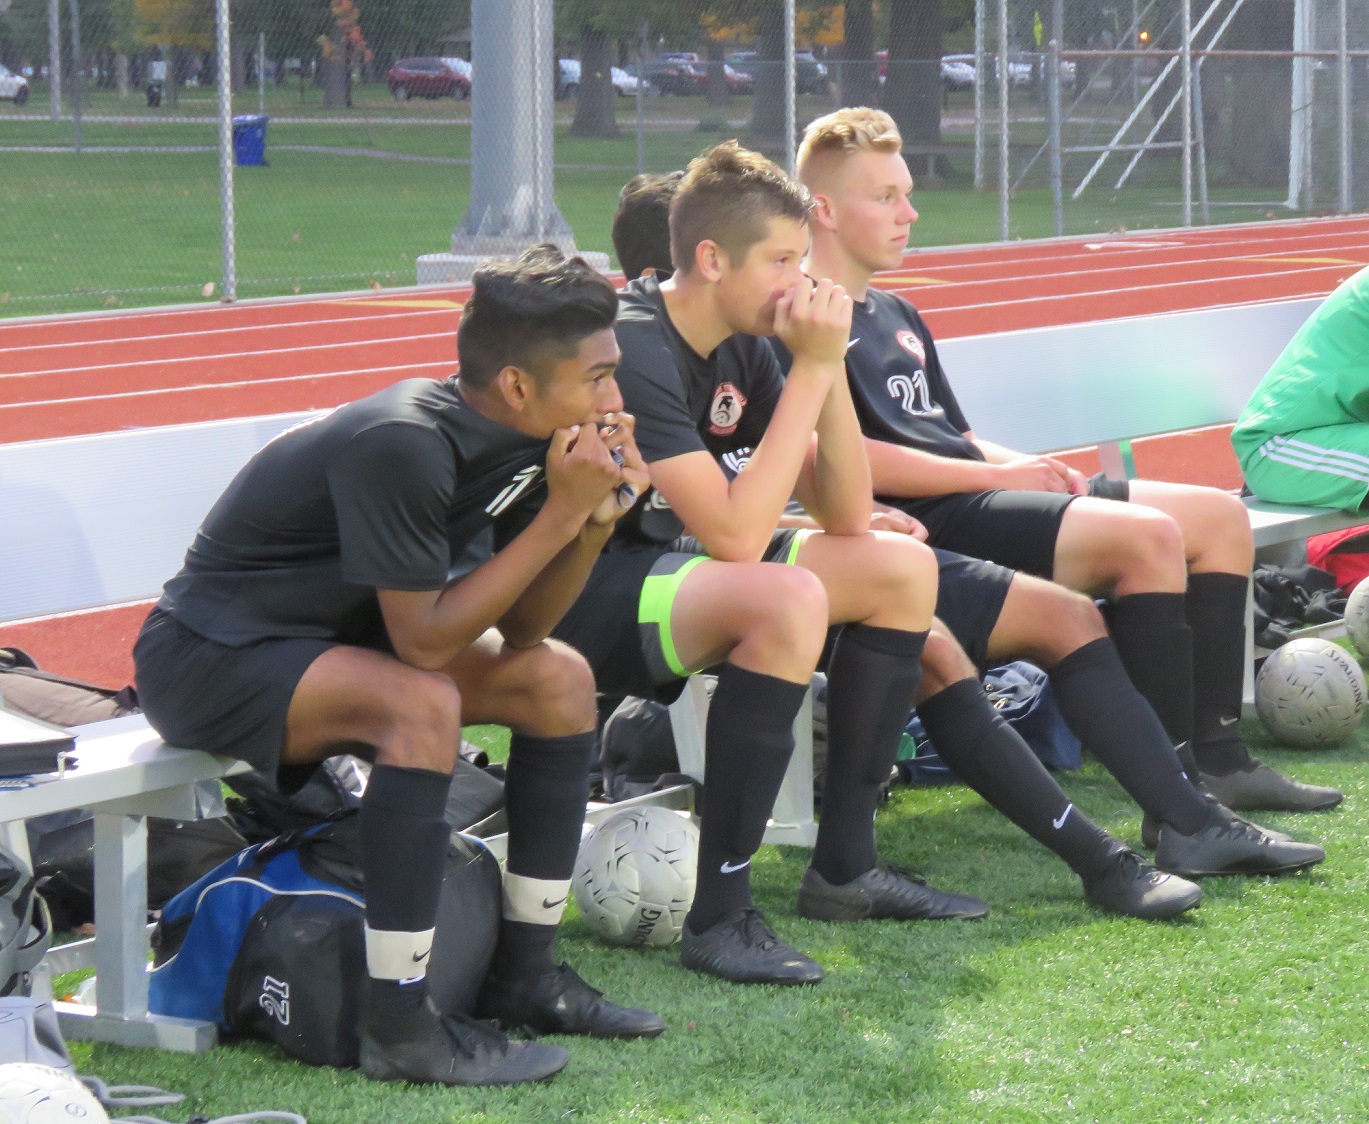 Members of the Niagara-Wheatfield boys soccer team sit on the bench following its defeat in the Niagara Frontier League title game versus Kenmore East. (Photo by David Yarger)